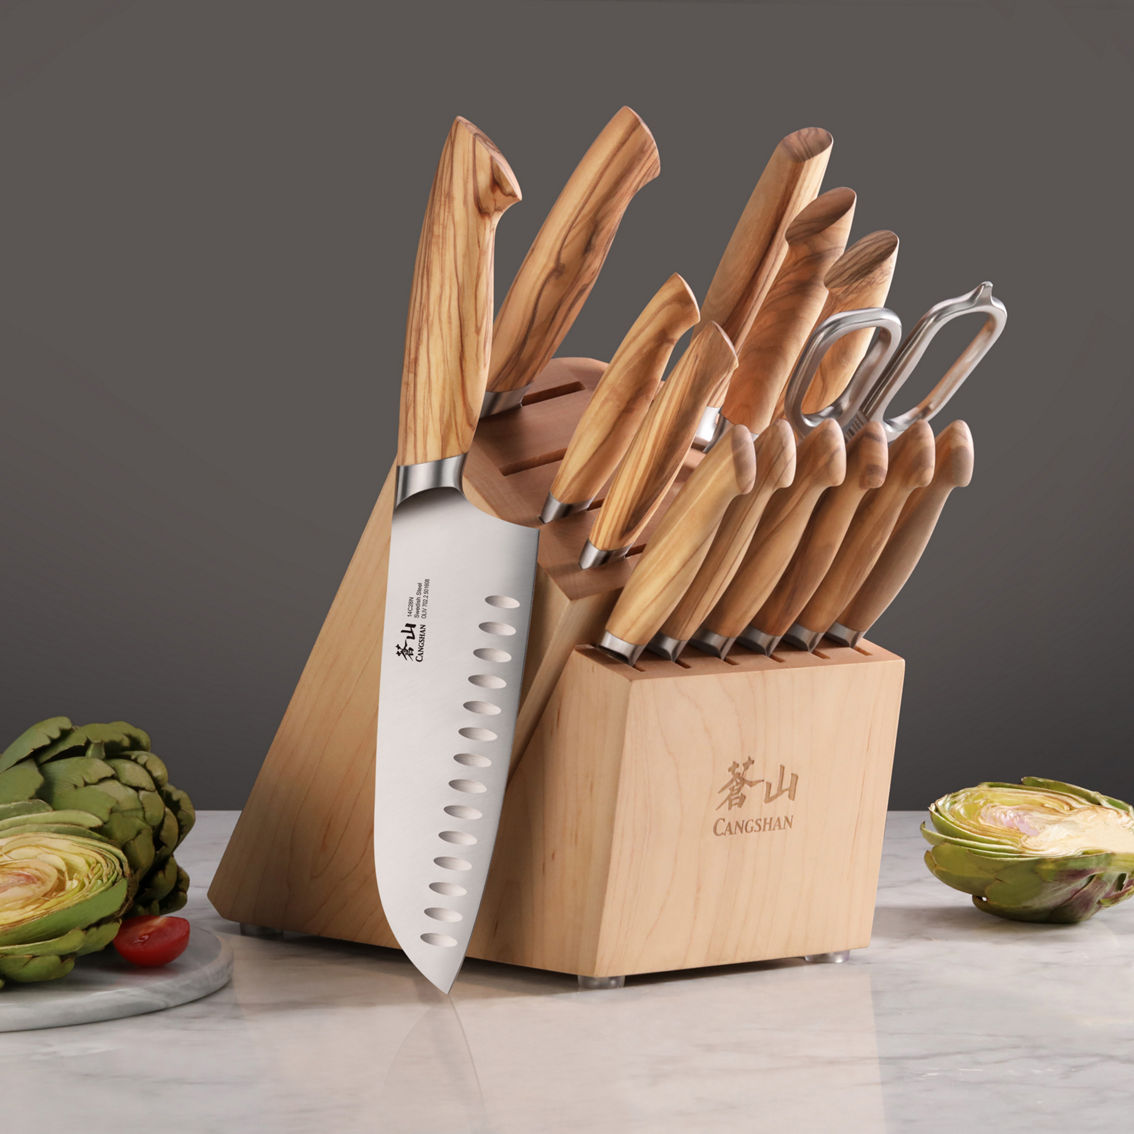 Cangshan Cutlery Oliv Series Forged 15 pc. Knife Block Set - Image 4 of 6